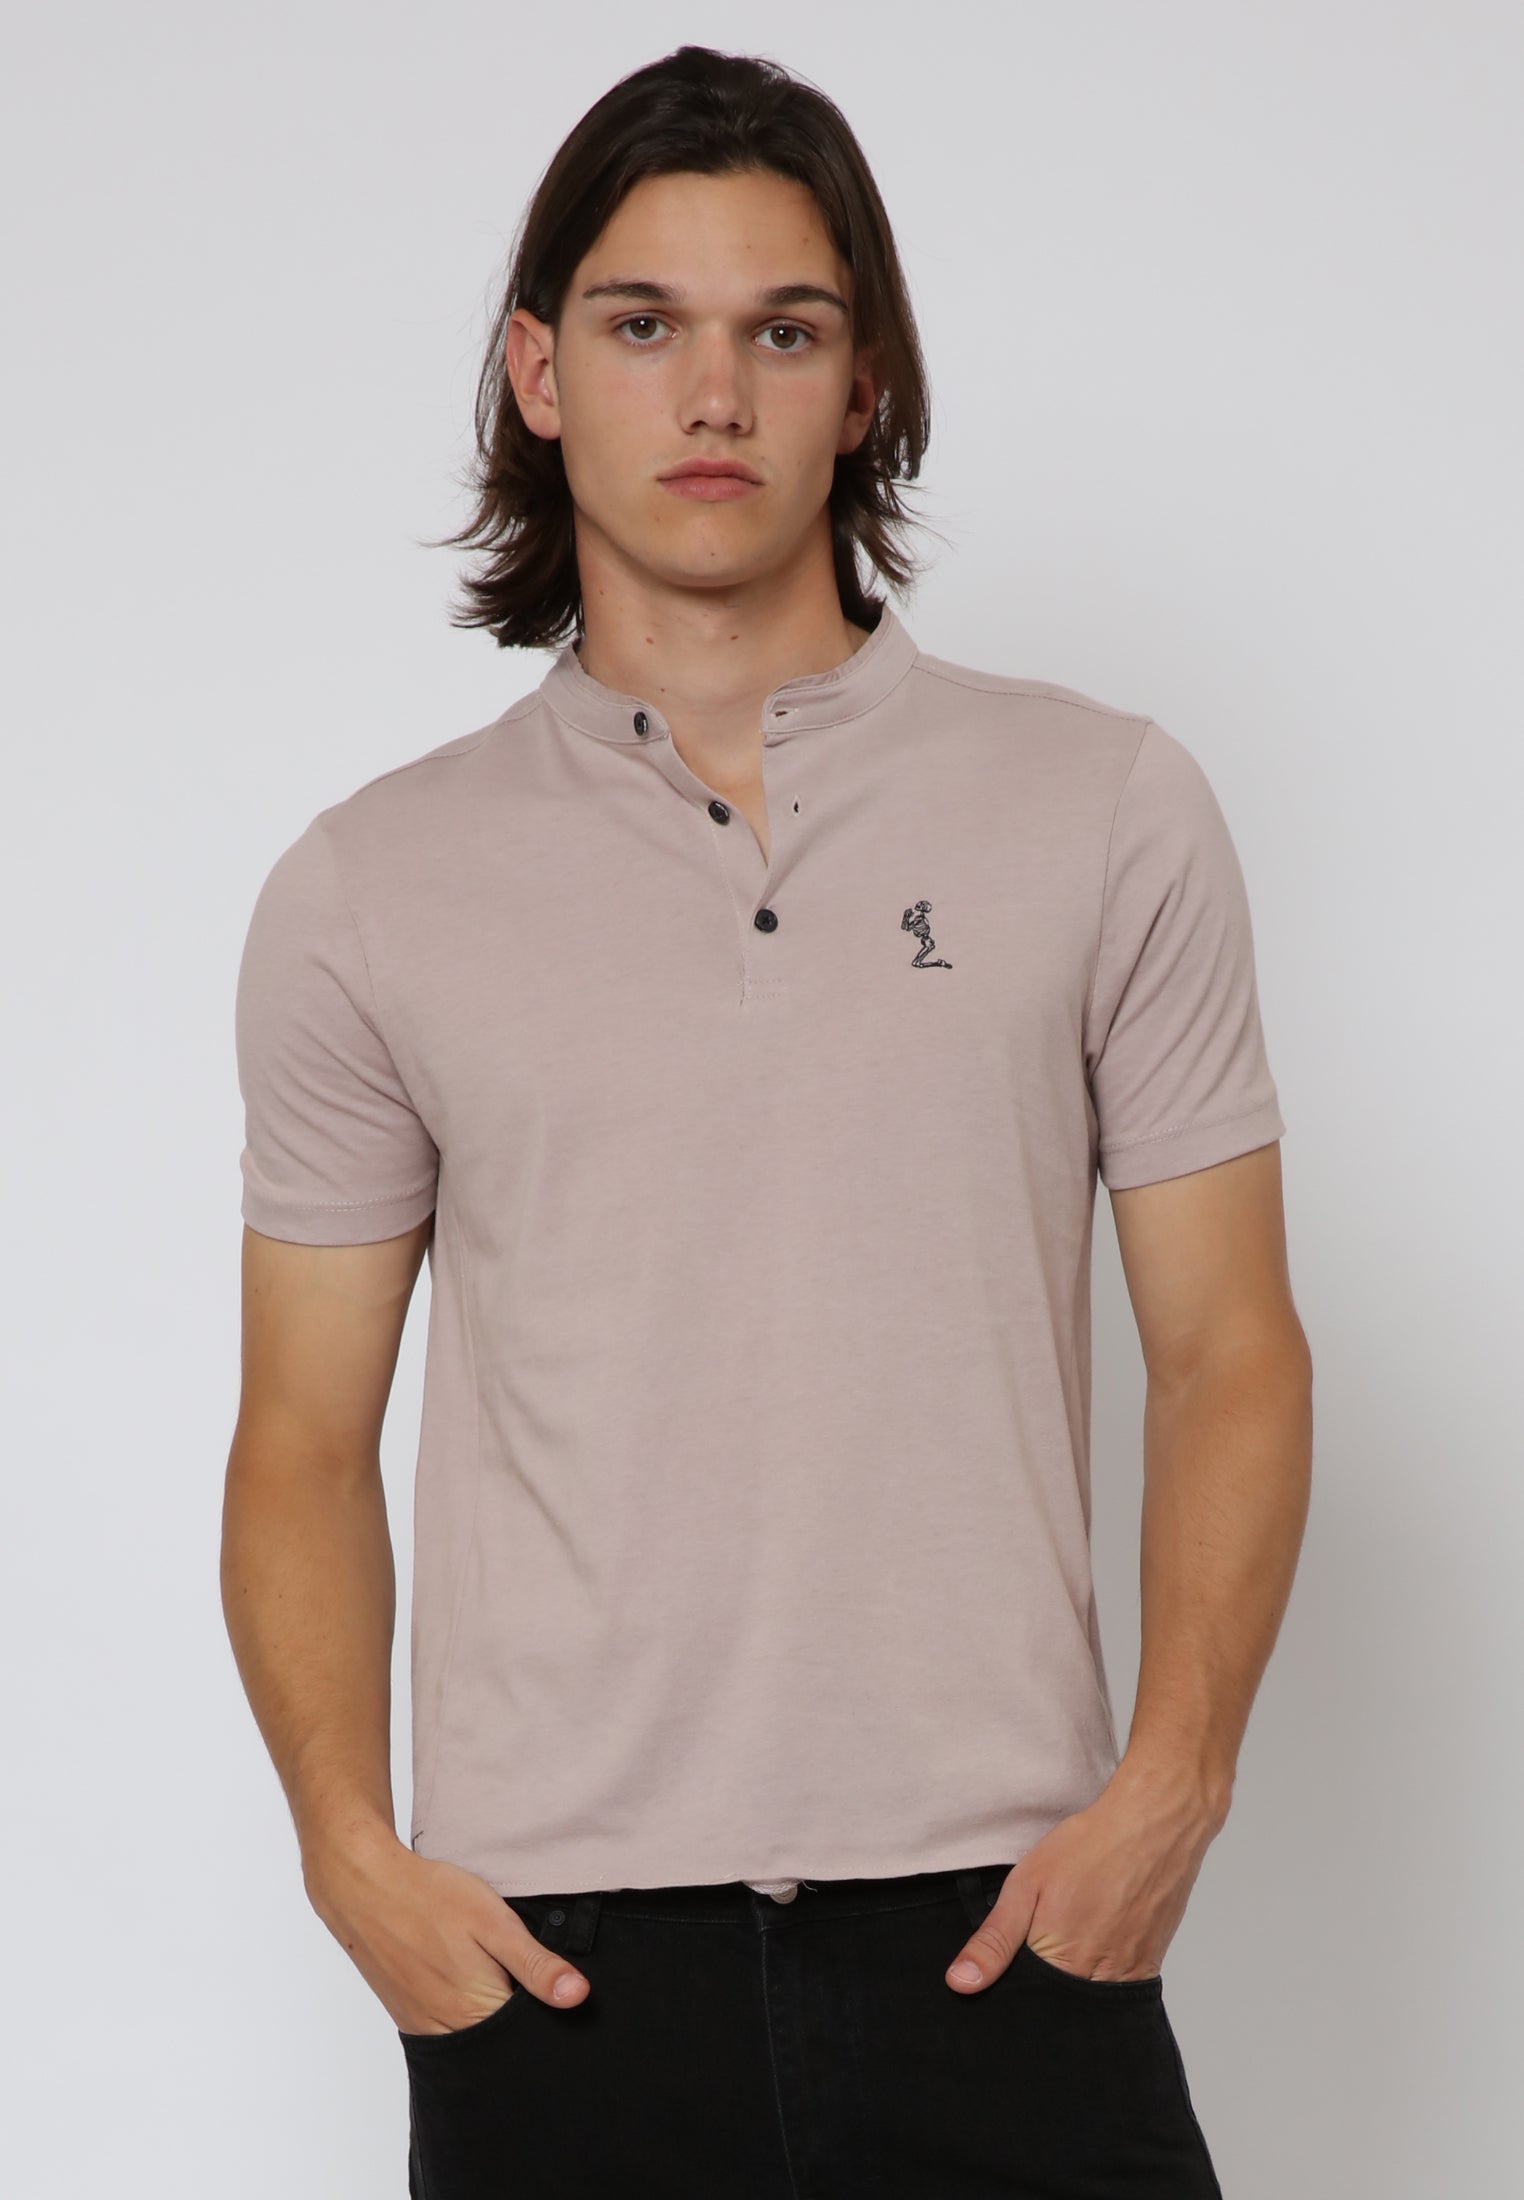 ESSENTIAL ORSON ASHES OF ROSES POLO SHIRT